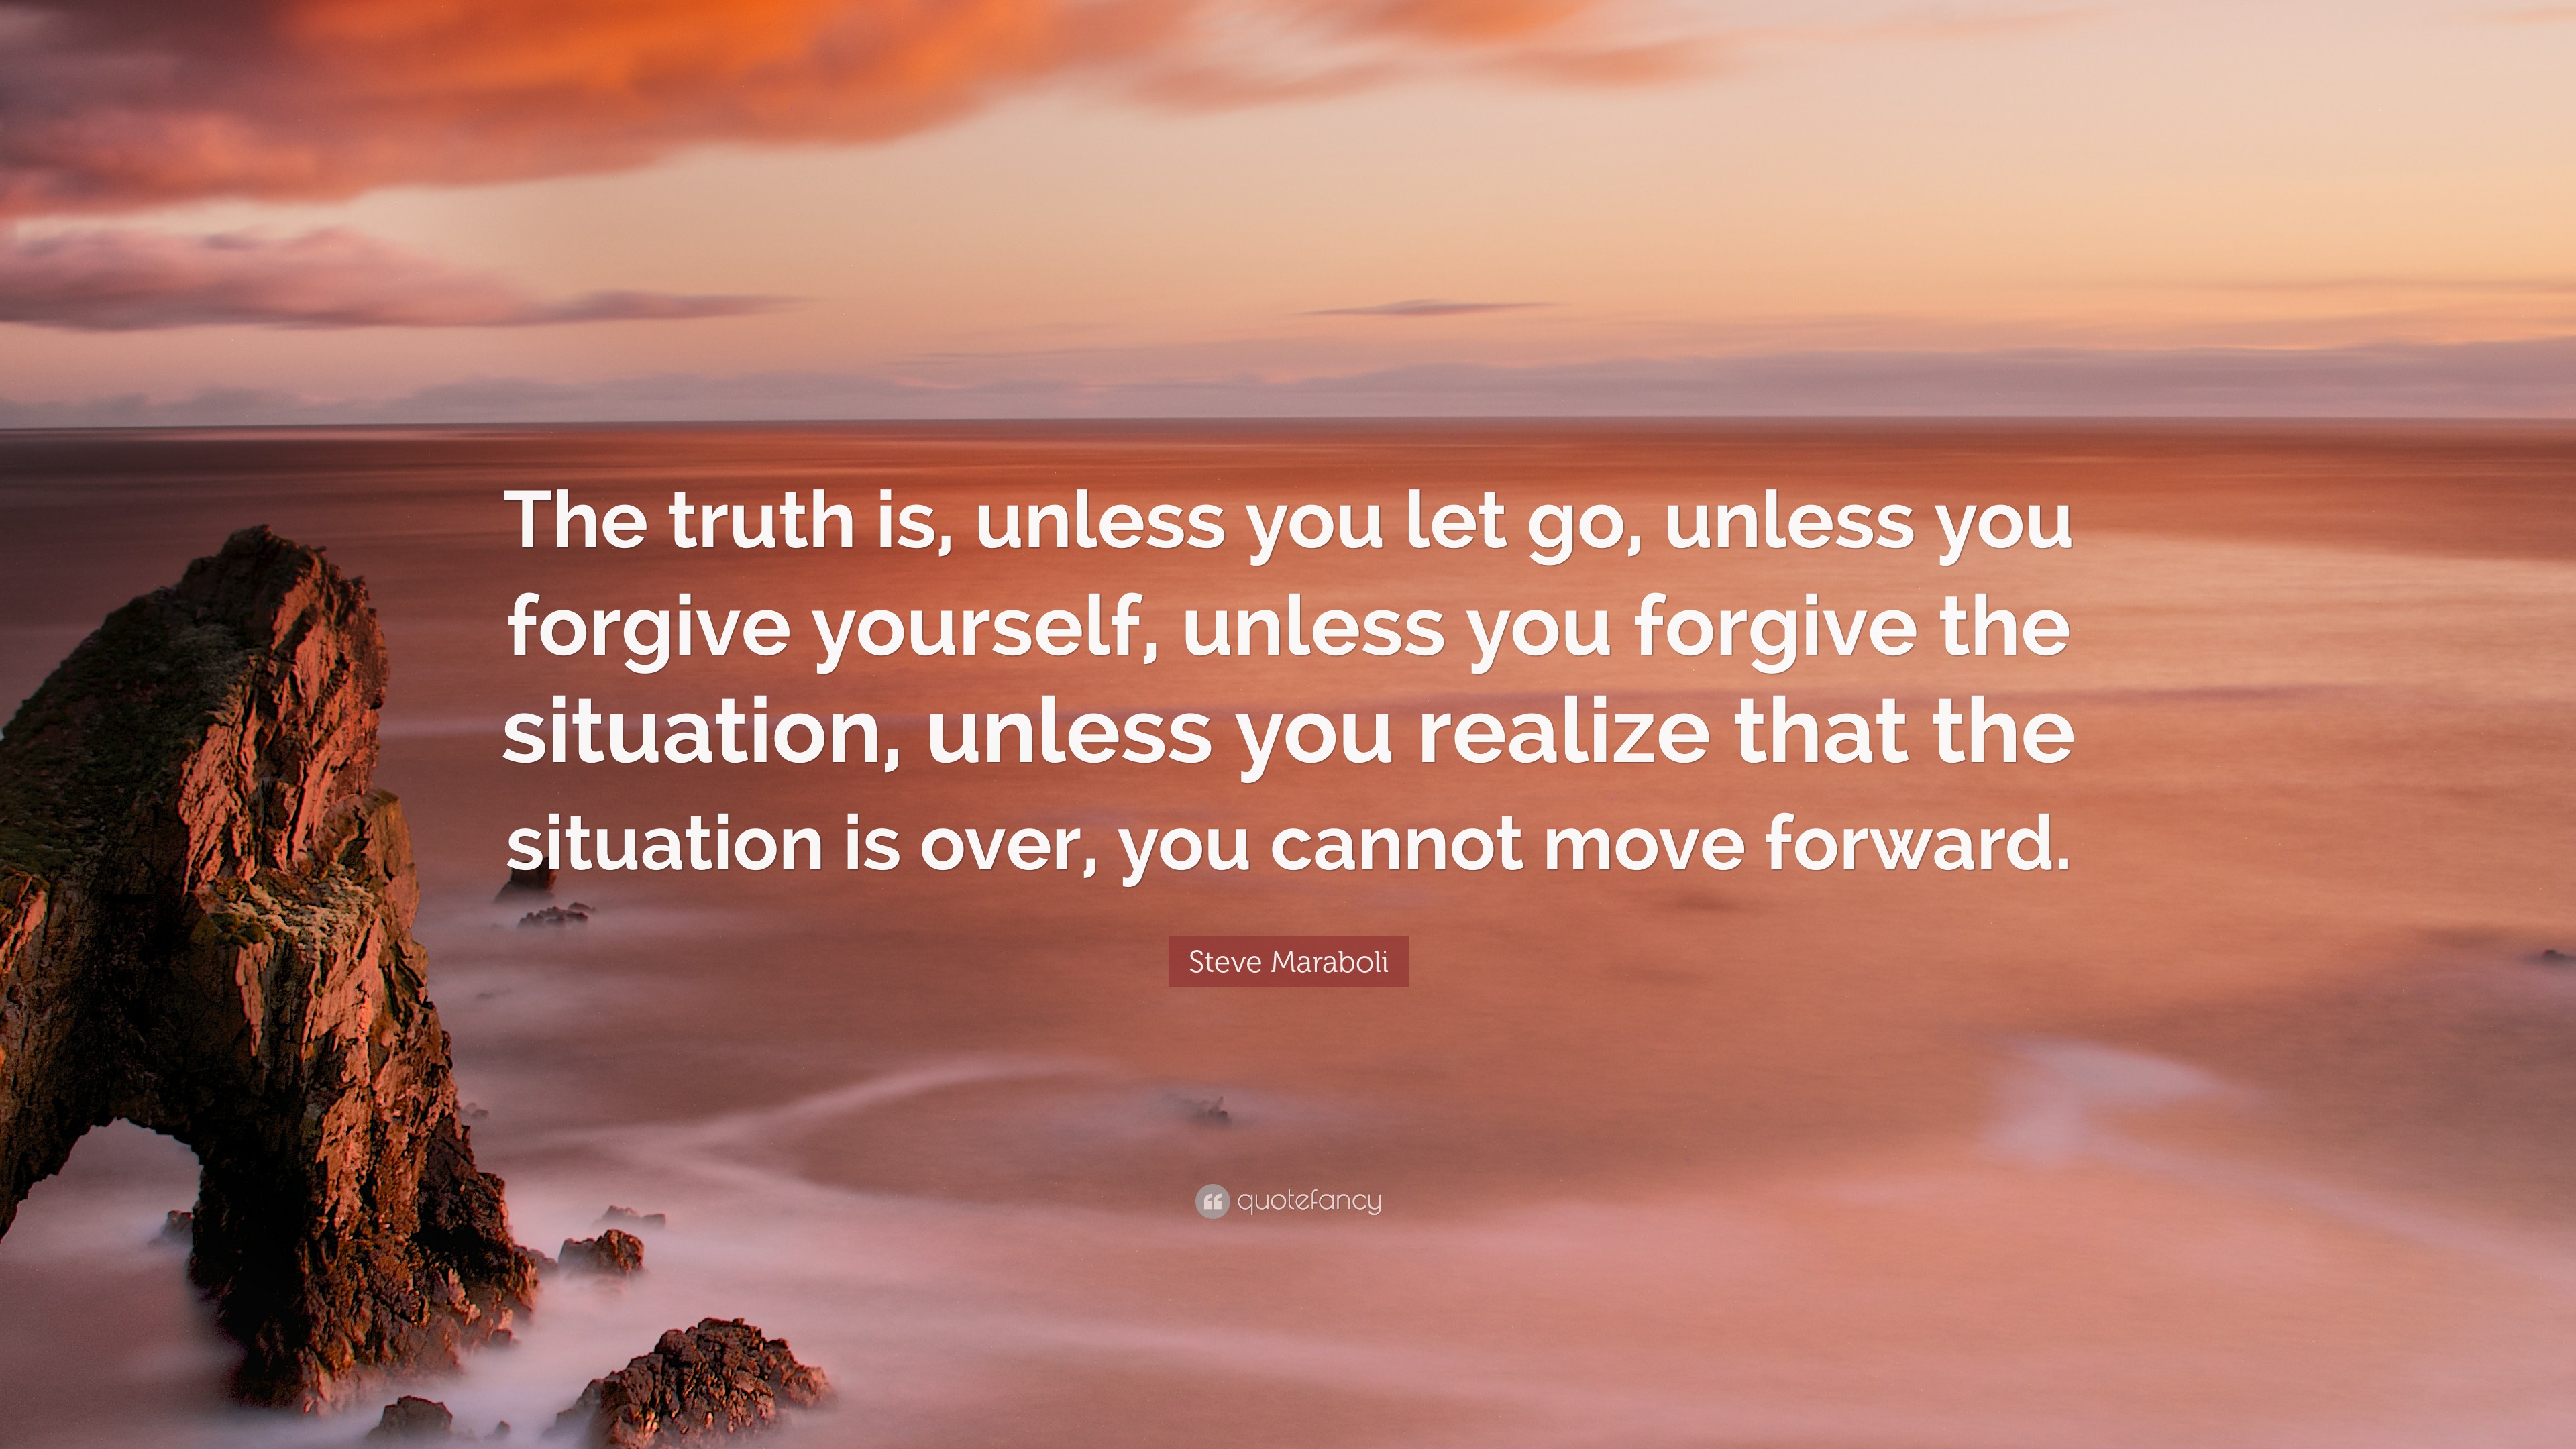 Steve Maraboli Quote: "The truth is, unless you let go ...